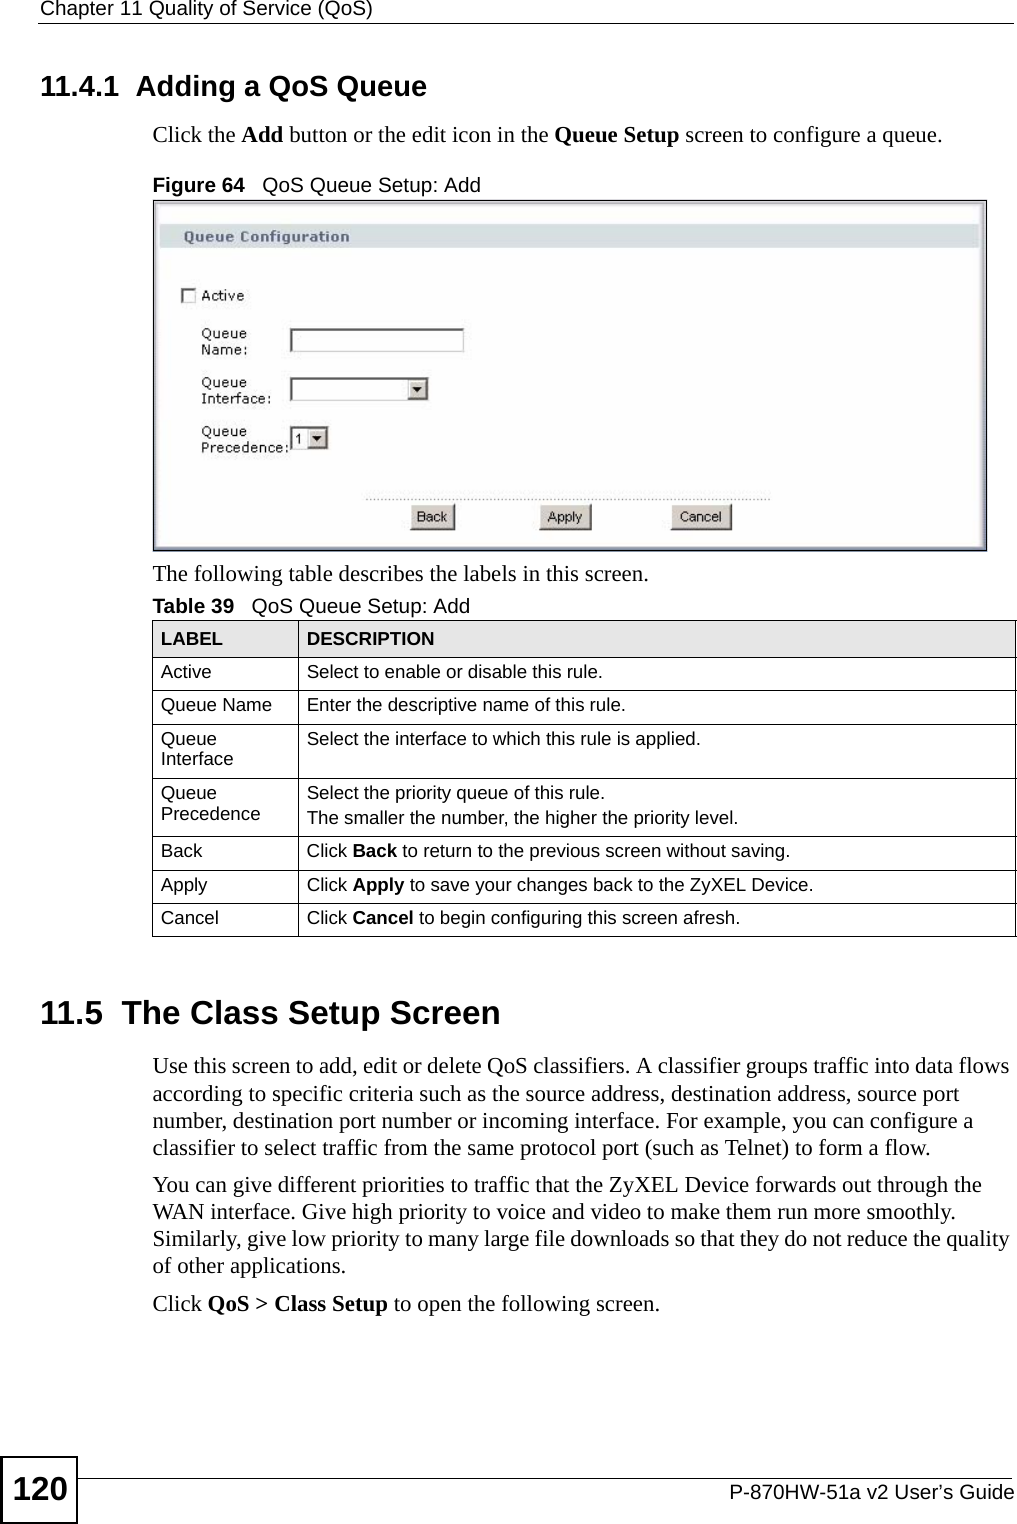 Chapter 11 Quality of Service (QoS)P-870HW-51a v2 User’s Guide12011.4.1  Adding a QoS Queue Click the Add button or the edit icon in the Queue Setup screen to configure a queue. Figure 64   QoS Queue Setup: Add The following table describes the labels in this screen.  11.5  The Class Setup Screen   Use this screen to add, edit or delete QoS classifiers. A classifier groups traffic into data flows according to specific criteria such as the source address, destination address, source port number, destination port number or incoming interface. For example, you can configure a classifier to select traffic from the same protocol port (such as Telnet) to form a flow.You can give different priorities to traffic that the ZyXEL Device forwards out through the WAN interface. Give high priority to voice and video to make them run more smoothly. Similarly, give low priority to many large file downloads so that they do not reduce the quality of other applications. Click QoS &gt; Class Setup to open the following screen.Table 39   QoS Queue Setup: AddLABEL DESCRIPTIONActive Select to enable or disable this rule.Queue Name Enter the descriptive name of this rule.Queue Interface Select the interface to which this rule is applied.Queue Precedence Select the priority queue of this rule.The smaller the number, the higher the priority level.Back Click Back to return to the previous screen without saving.Apply Click Apply to save your changes back to the ZyXEL Device.Cancel Click Cancel to begin configuring this screen afresh.